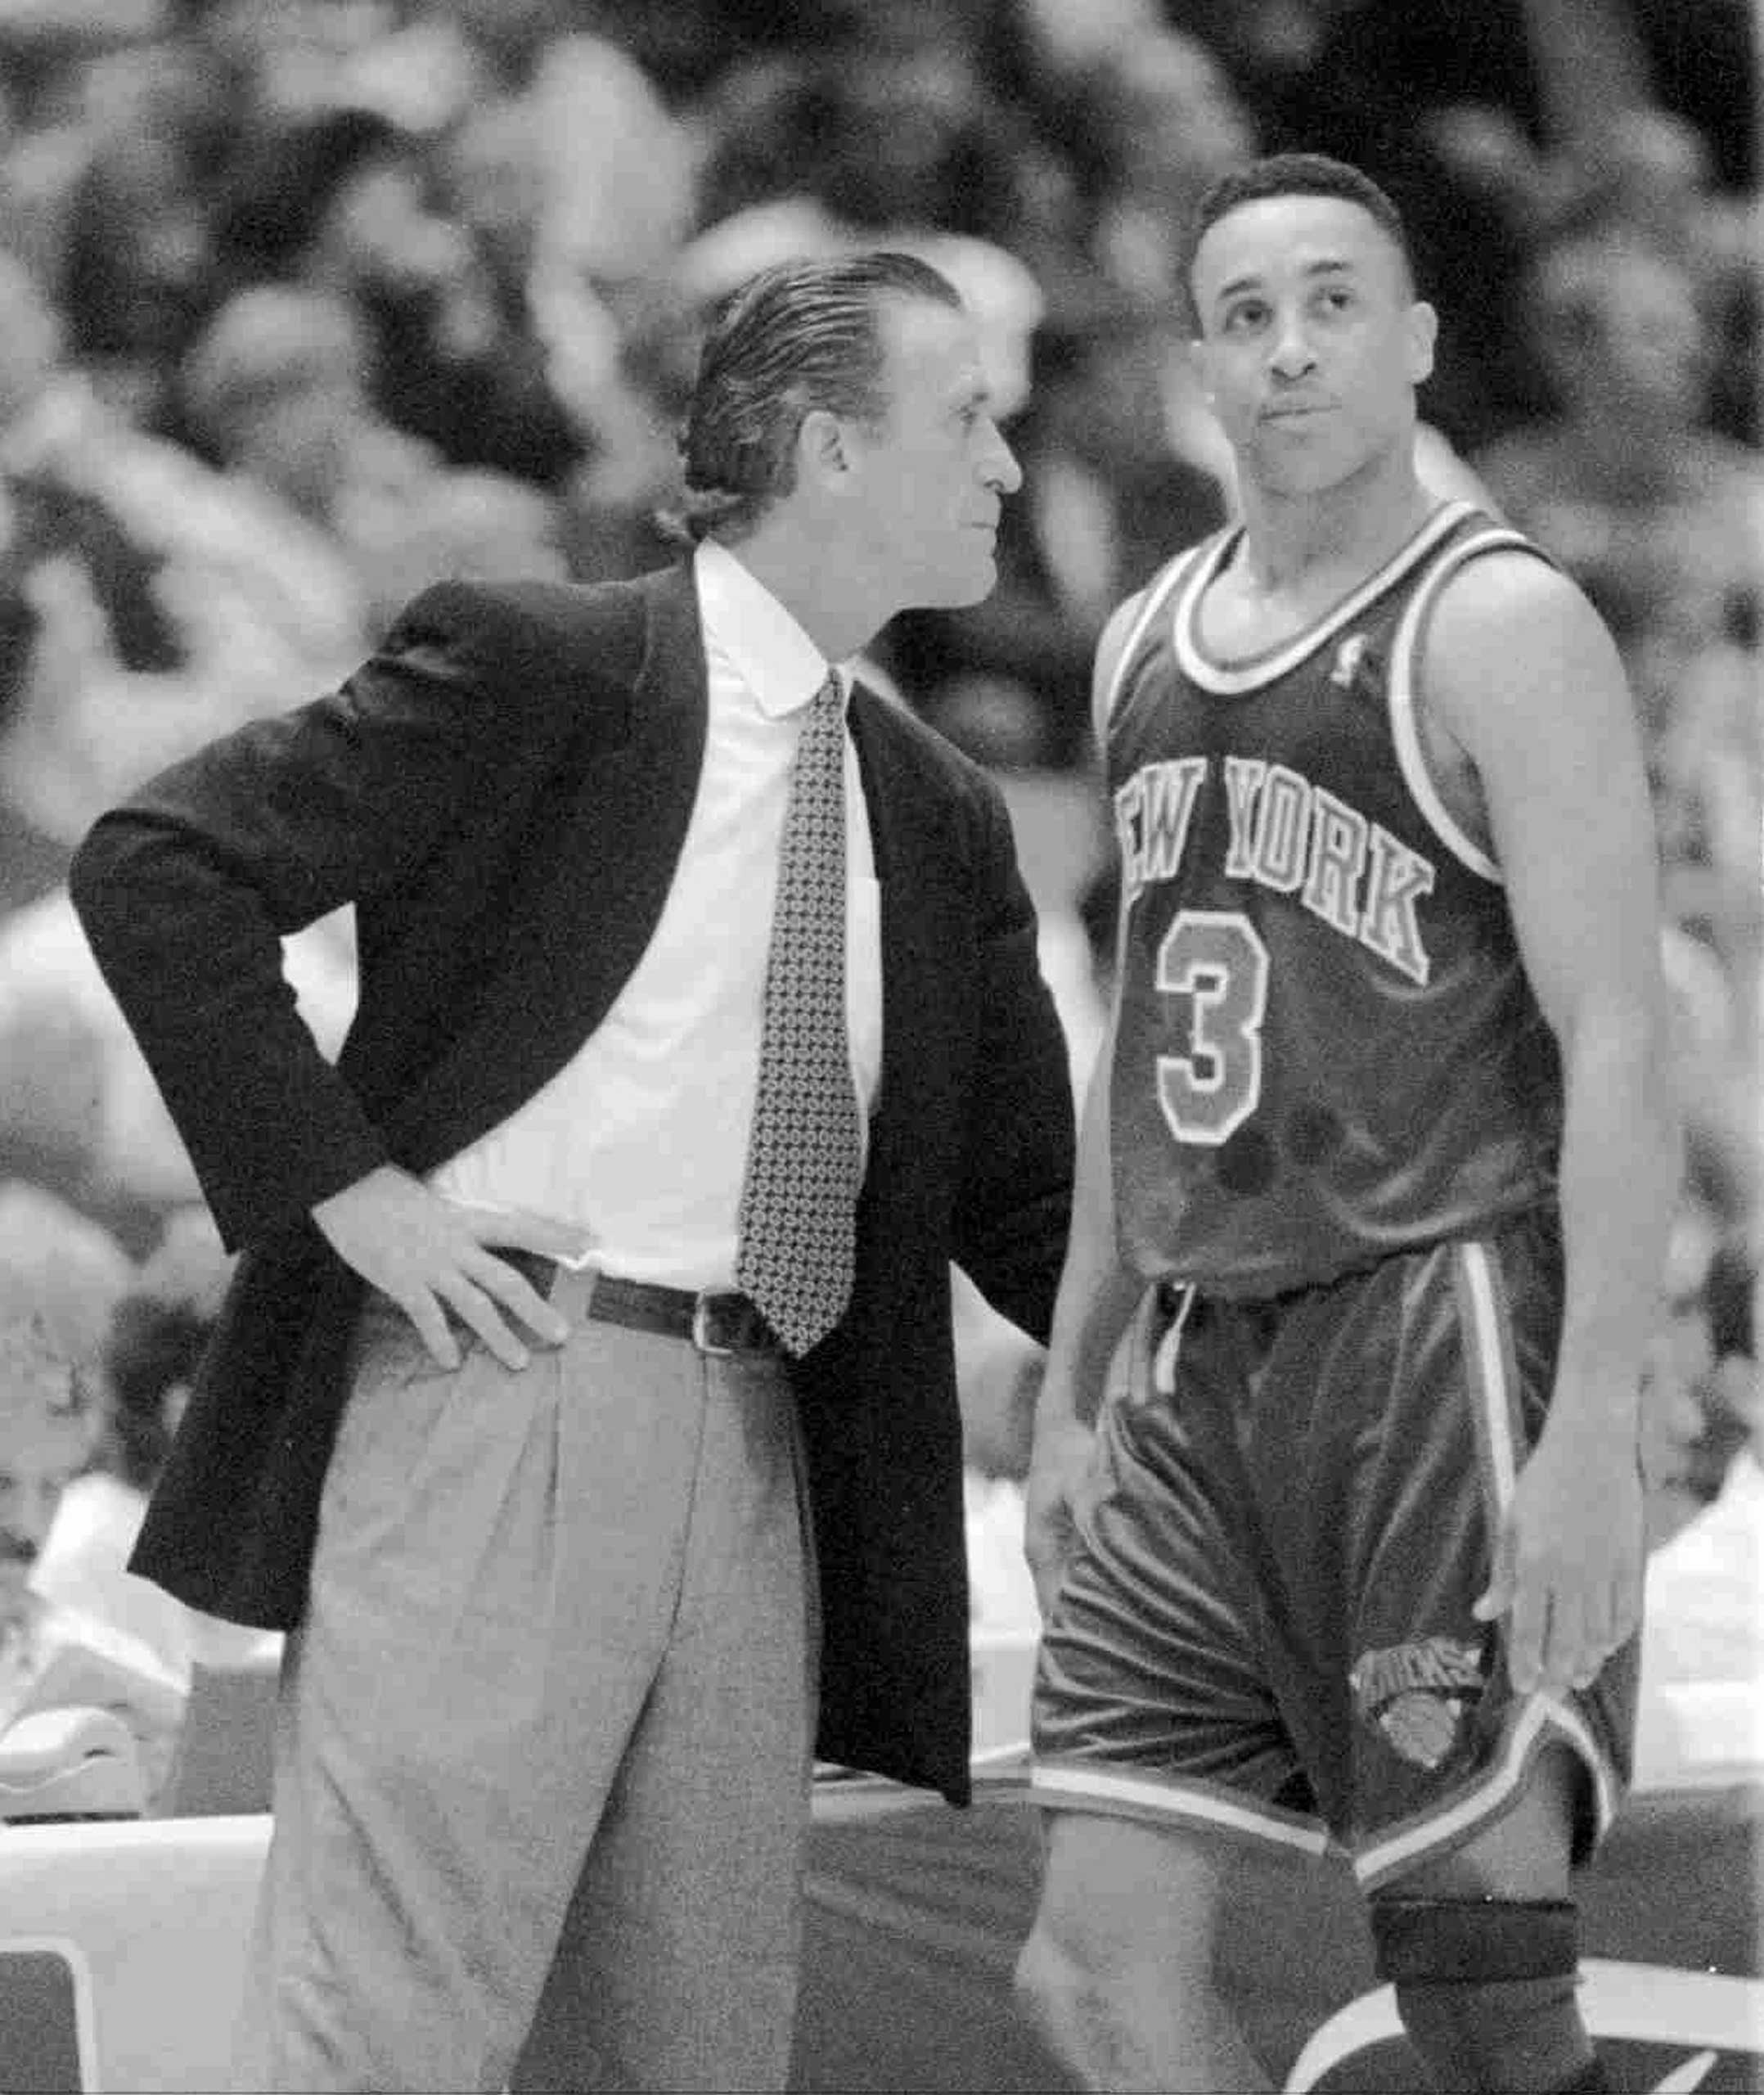 UNITED STATES - JUNE 22: New York Knicks' coach Pat Riley has a few words for John Starks after a foul in the second quarter during game against the Houston Rockets. (Photo by /NY Daily News Archive via Getty Images)